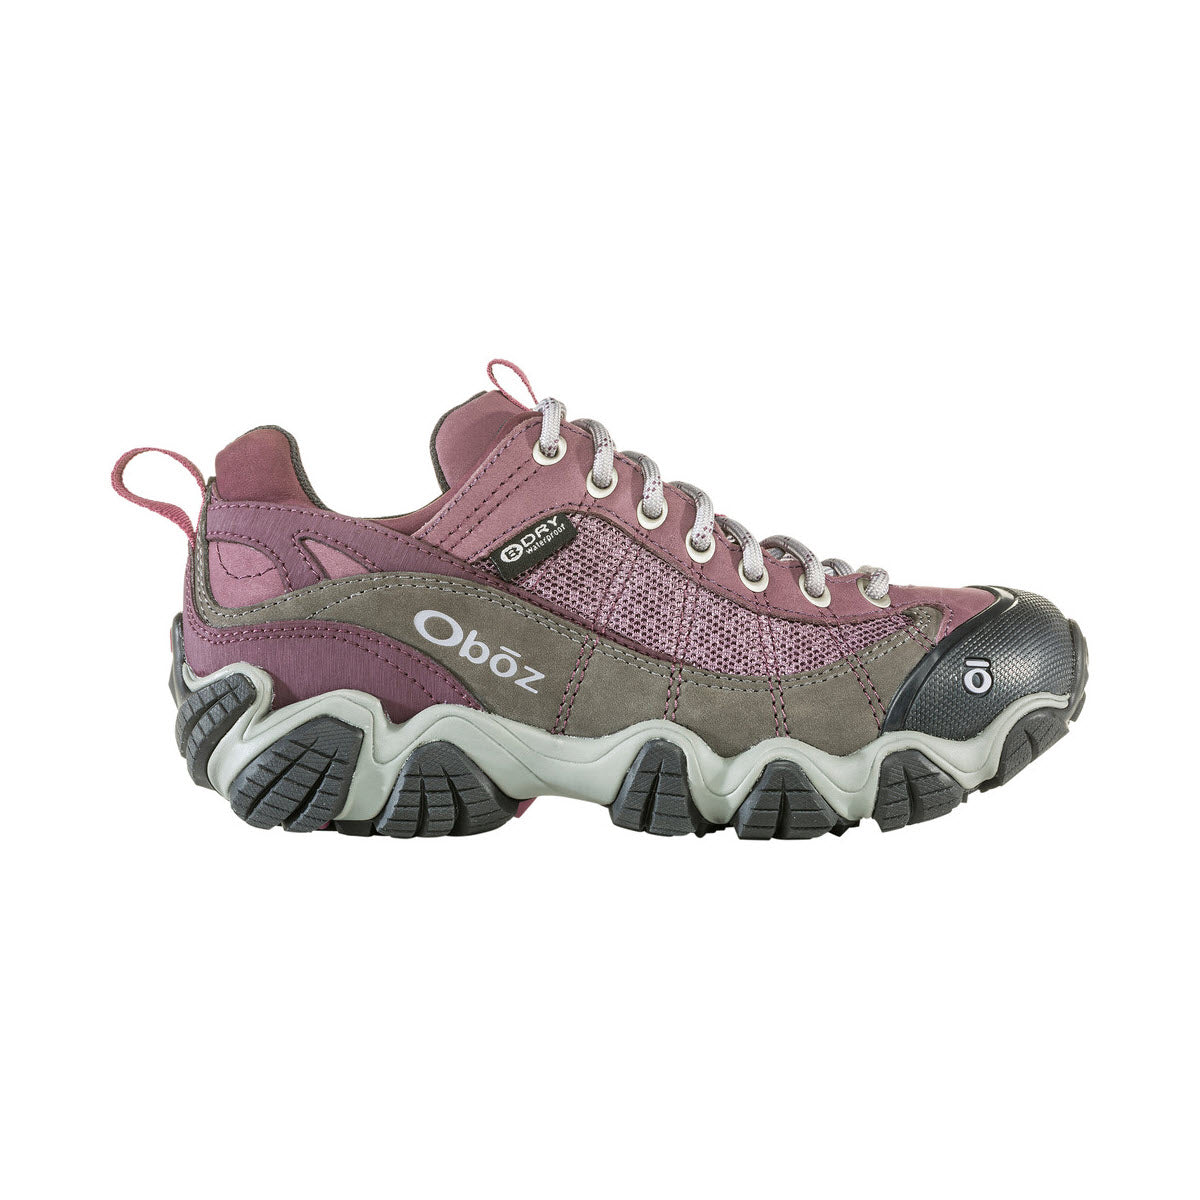 A pink and gray Oboz Firebrand II Low B Dry Lilac hiking shoe with a waterproof membrane, featuring a chunky sole, lace-up front, and pull tabs on the tongue and back.